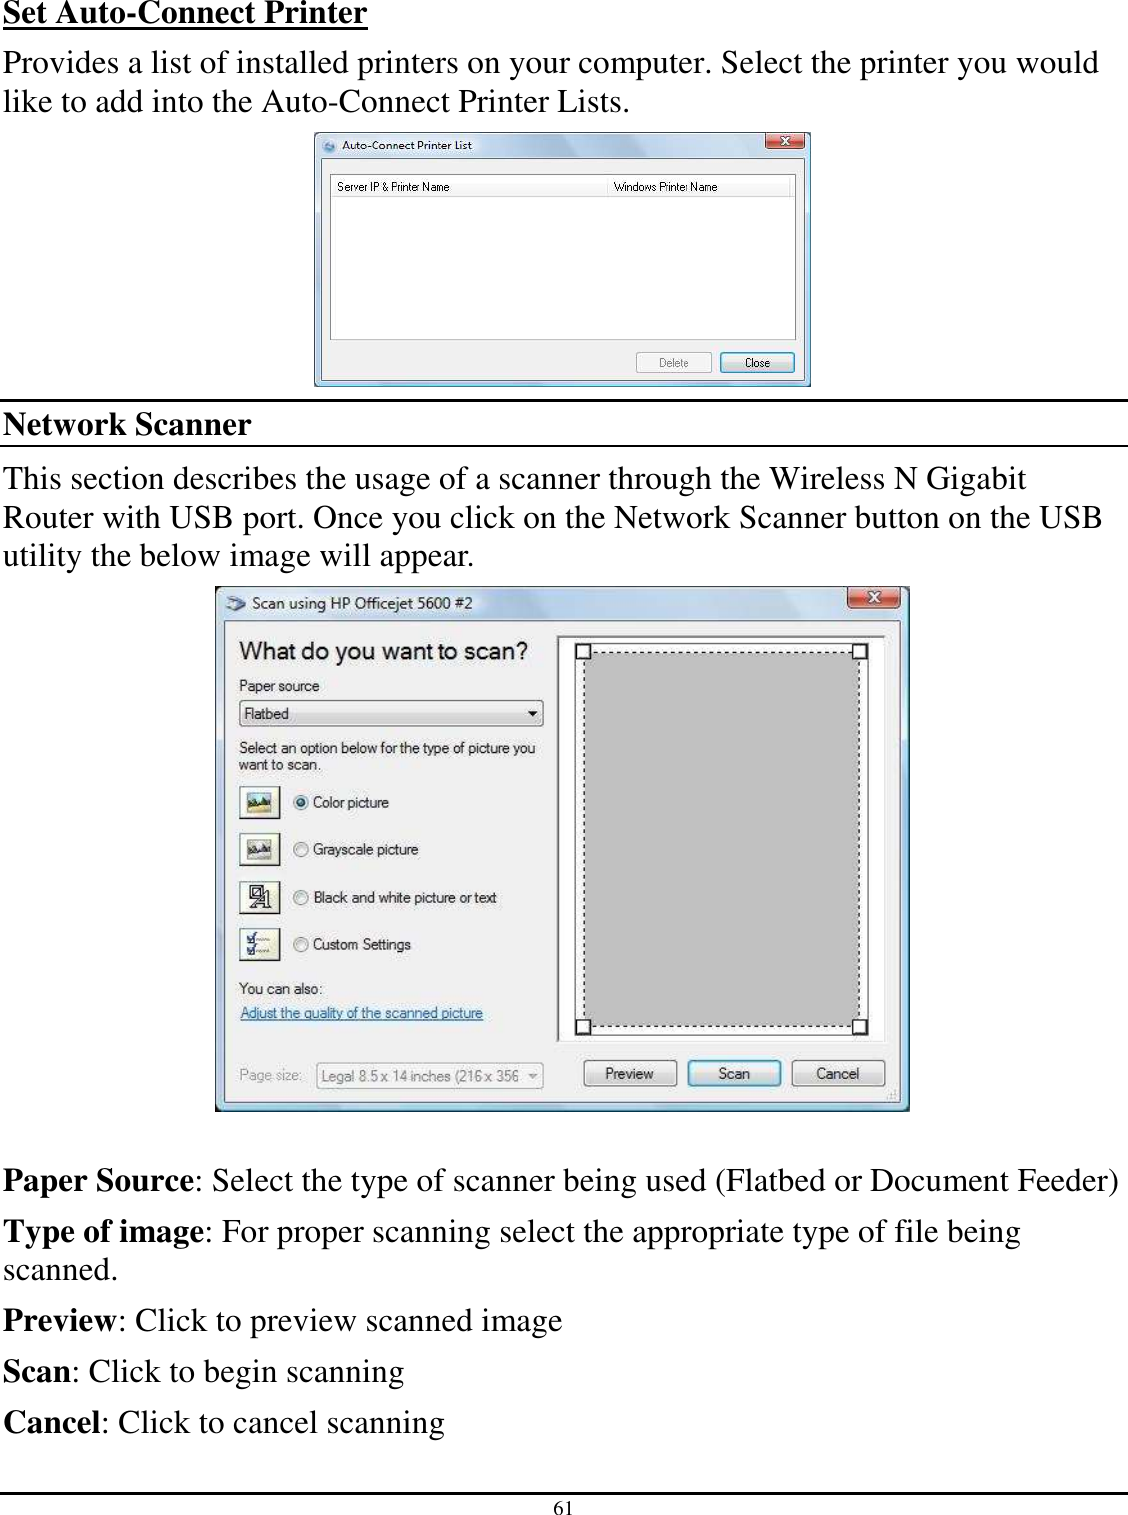 61  Set Auto-Connect Printer Provides a list of installed printers on your computer. Select the printer you would like to add into the Auto-Connect Printer Lists.   Network Scanner This section describes the usage of a scanner through the Wireless N Gigabit Router with USB port. Once you click on the Network Scanner button on the USB utility the below image will appear.   Paper Source: Select the type of scanner being used (Flatbed or Document Feeder) Type of image: For proper scanning select the appropriate type of file being scanned.  Preview: Click to preview scanned image Scan: Click to begin scanning  Cancel: Click to cancel scanning 